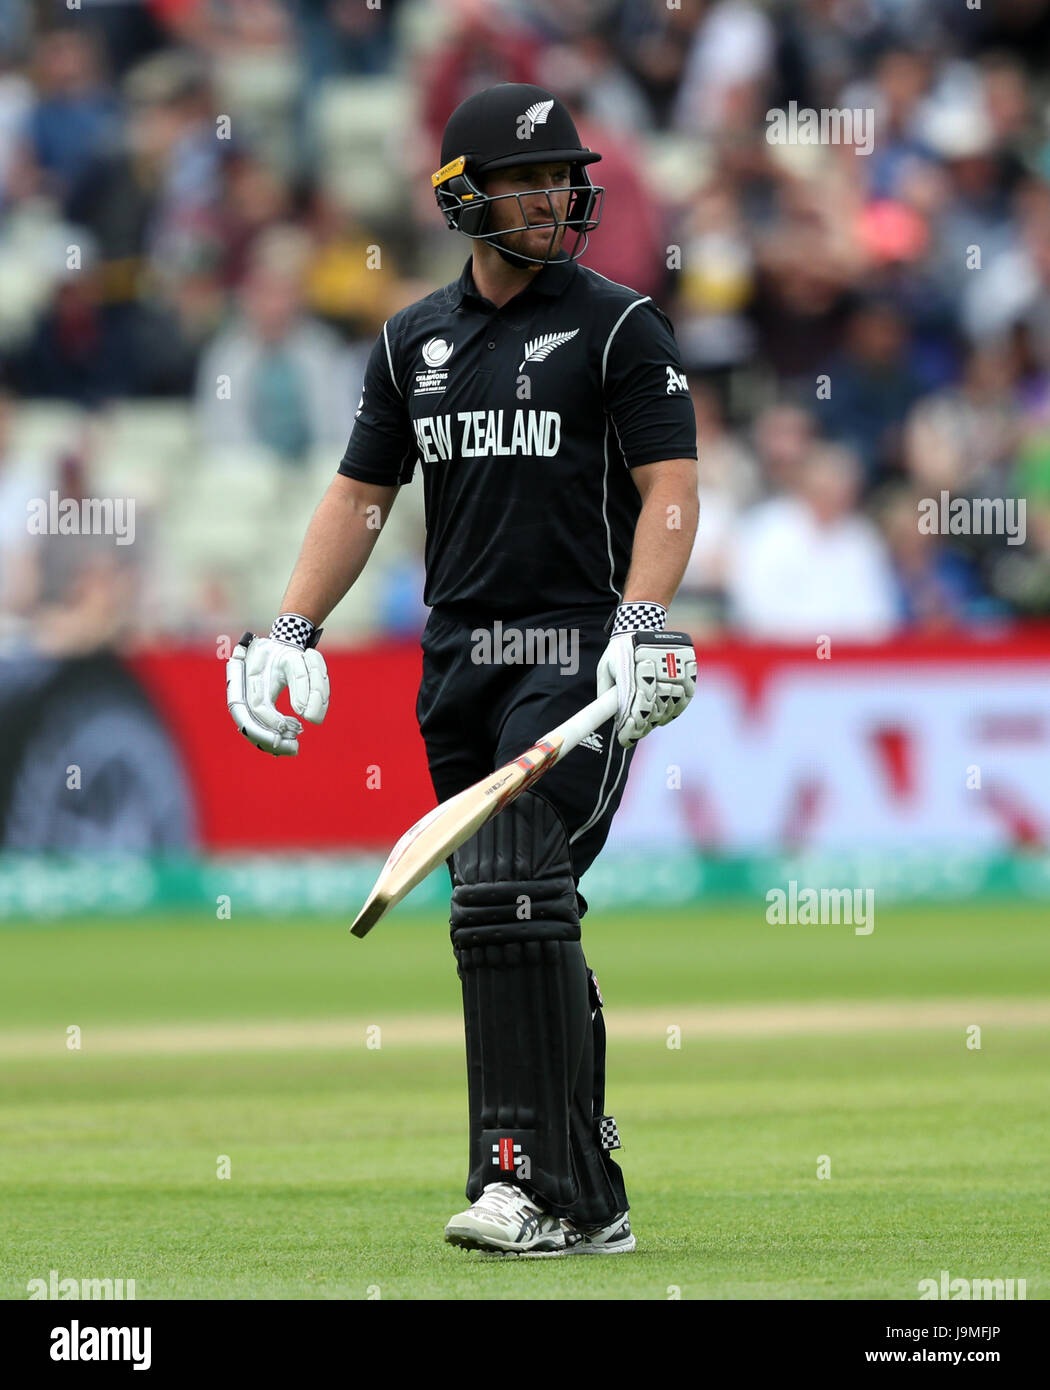 New Zealand's Neil Broom walks off after being dismissed by Australia's Josh Hazelwood during the ICC Champions Trophy, Group A match at Edgbaston, Birmingham. Stock Photo